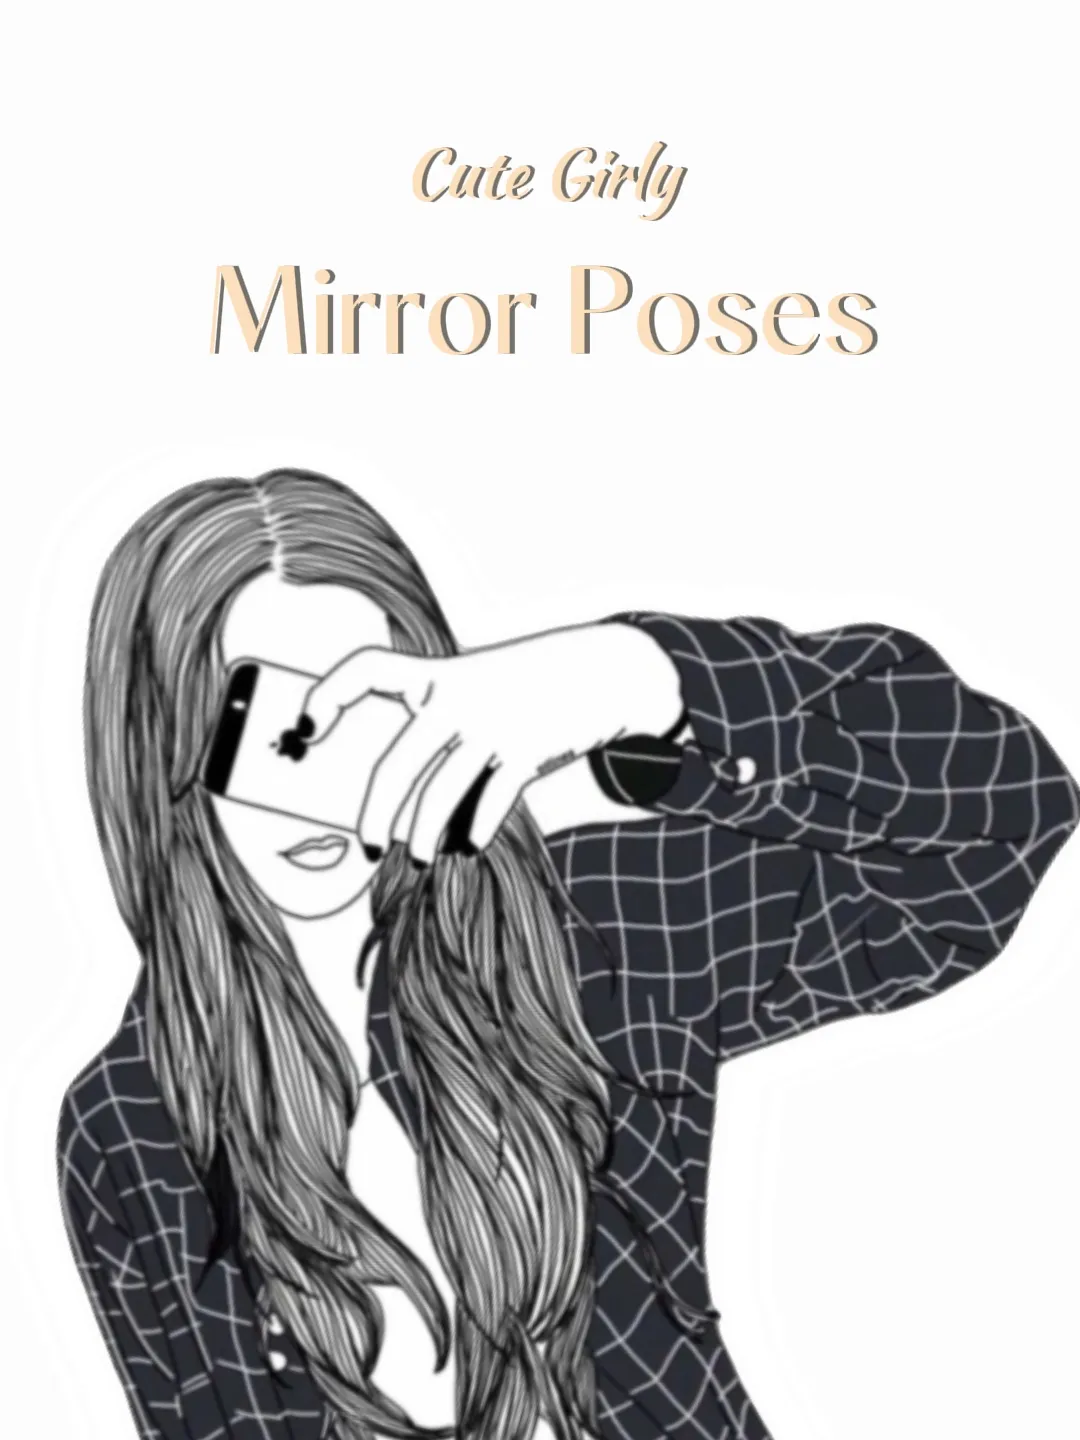 Cute Girly Mirror Poses's images